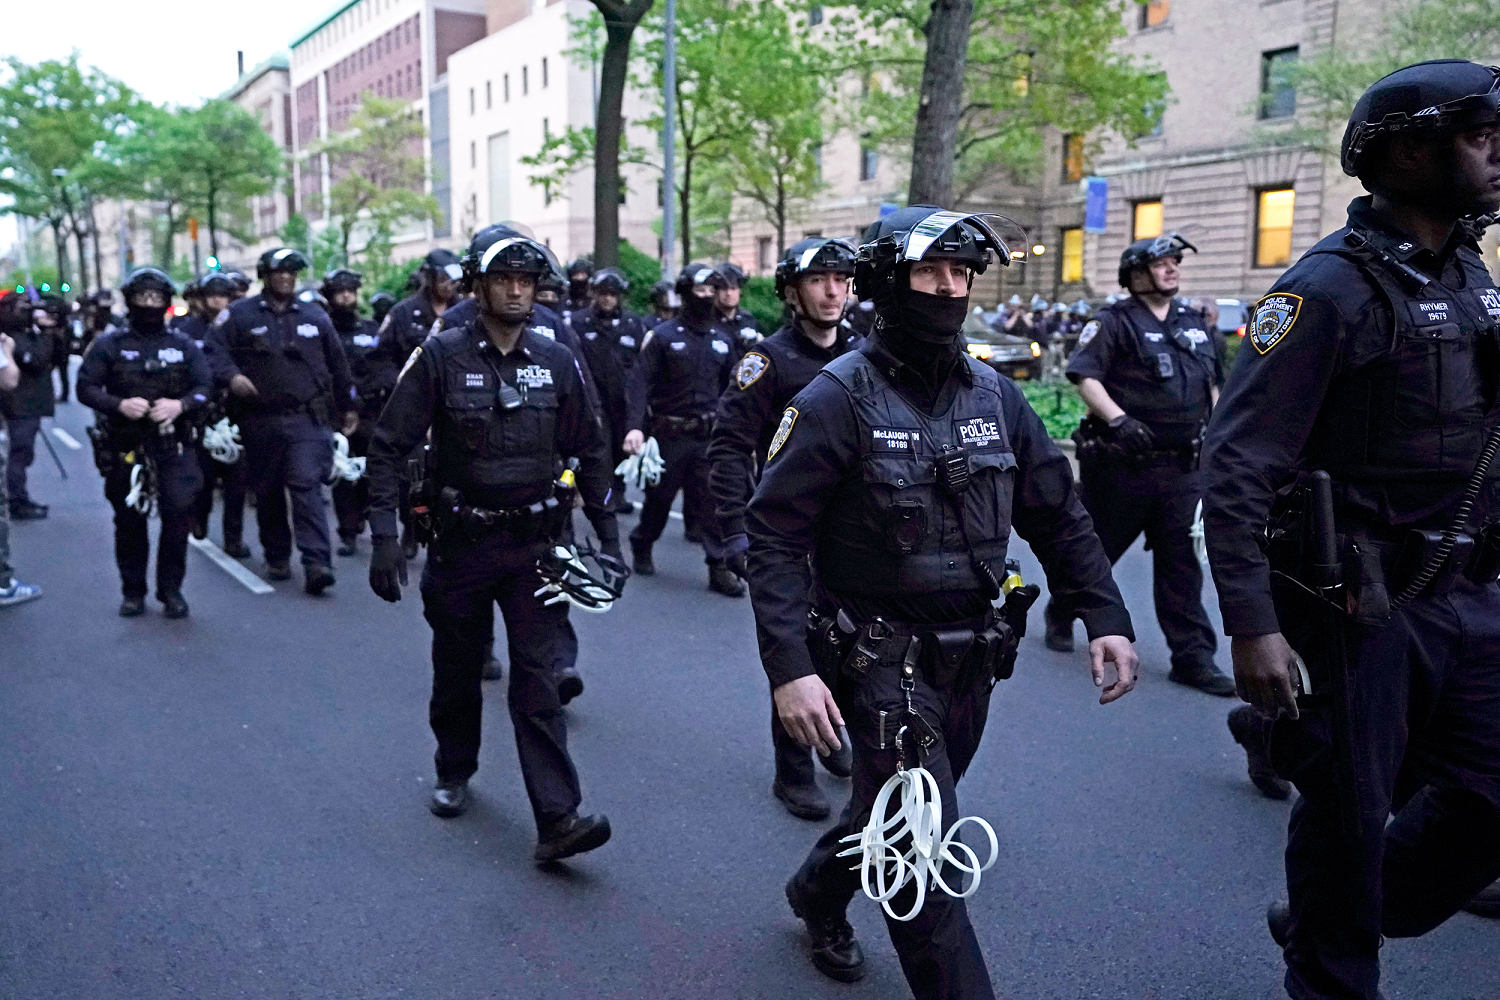 NYPD officers in riot gear enter Columbia campus